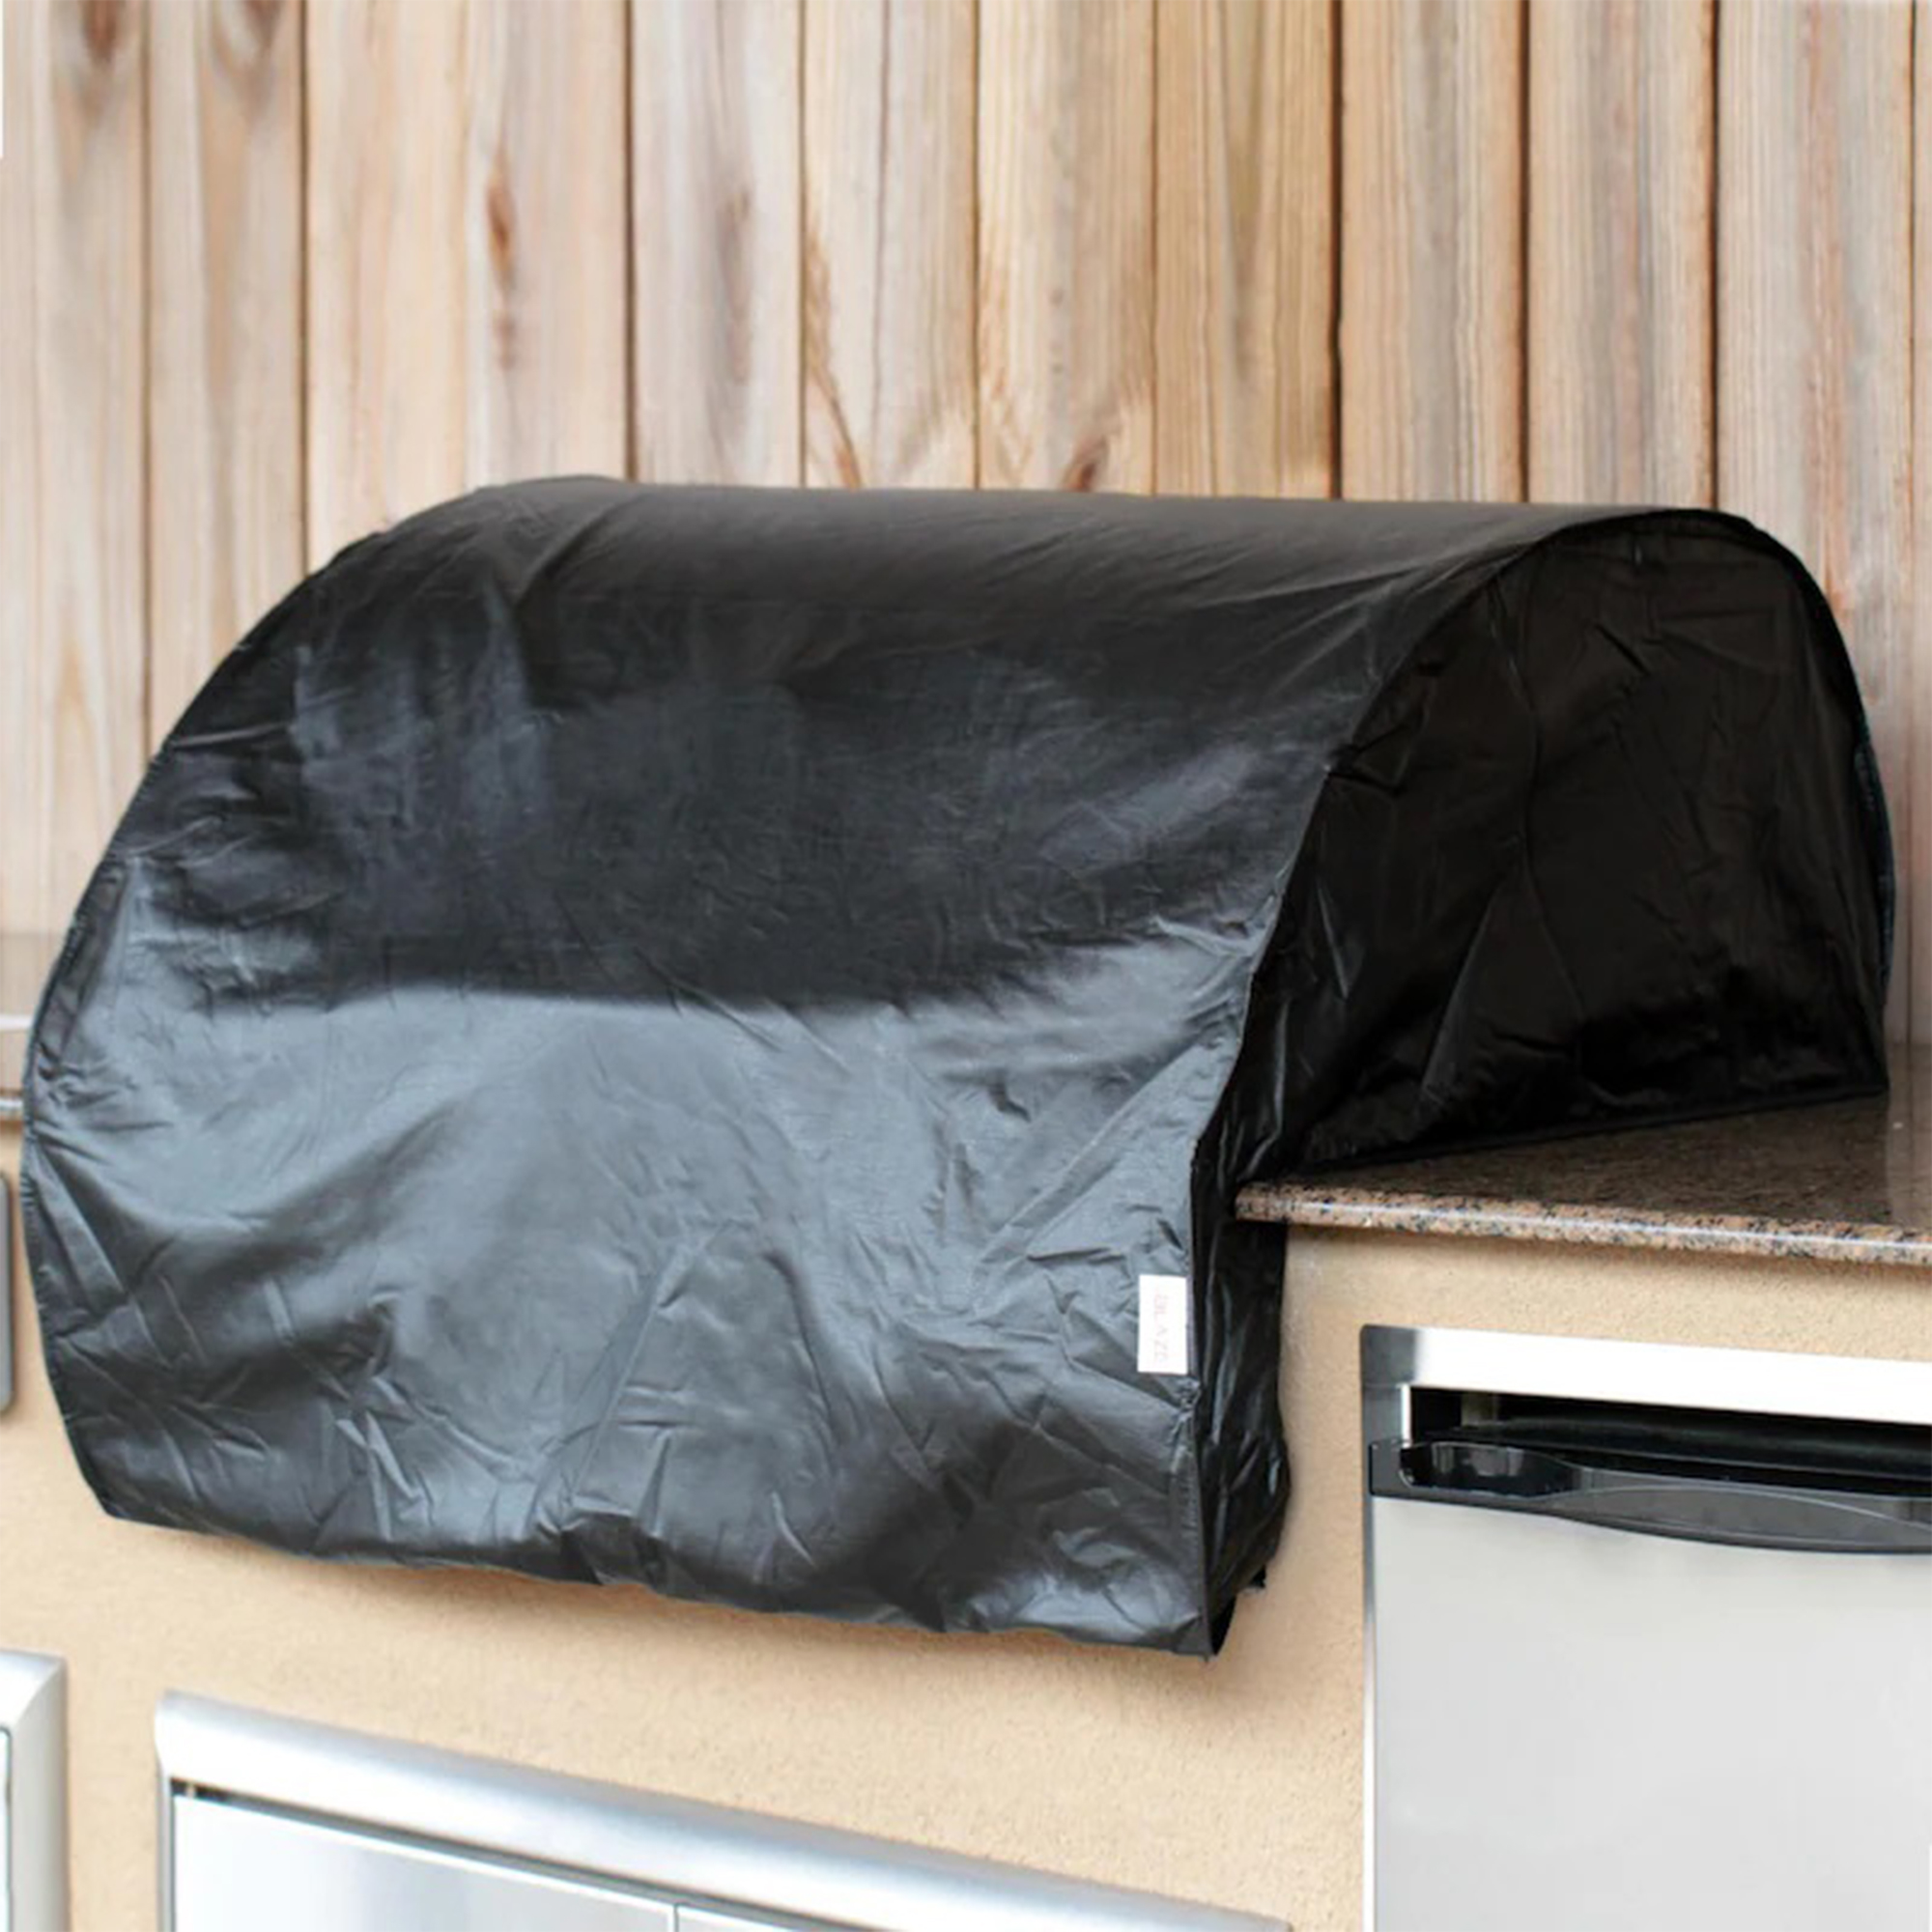 Blaze Grill Cover For Professional LUX 34-Inch Built-In Gas Grills - 3PROBICV - image 2 of 2